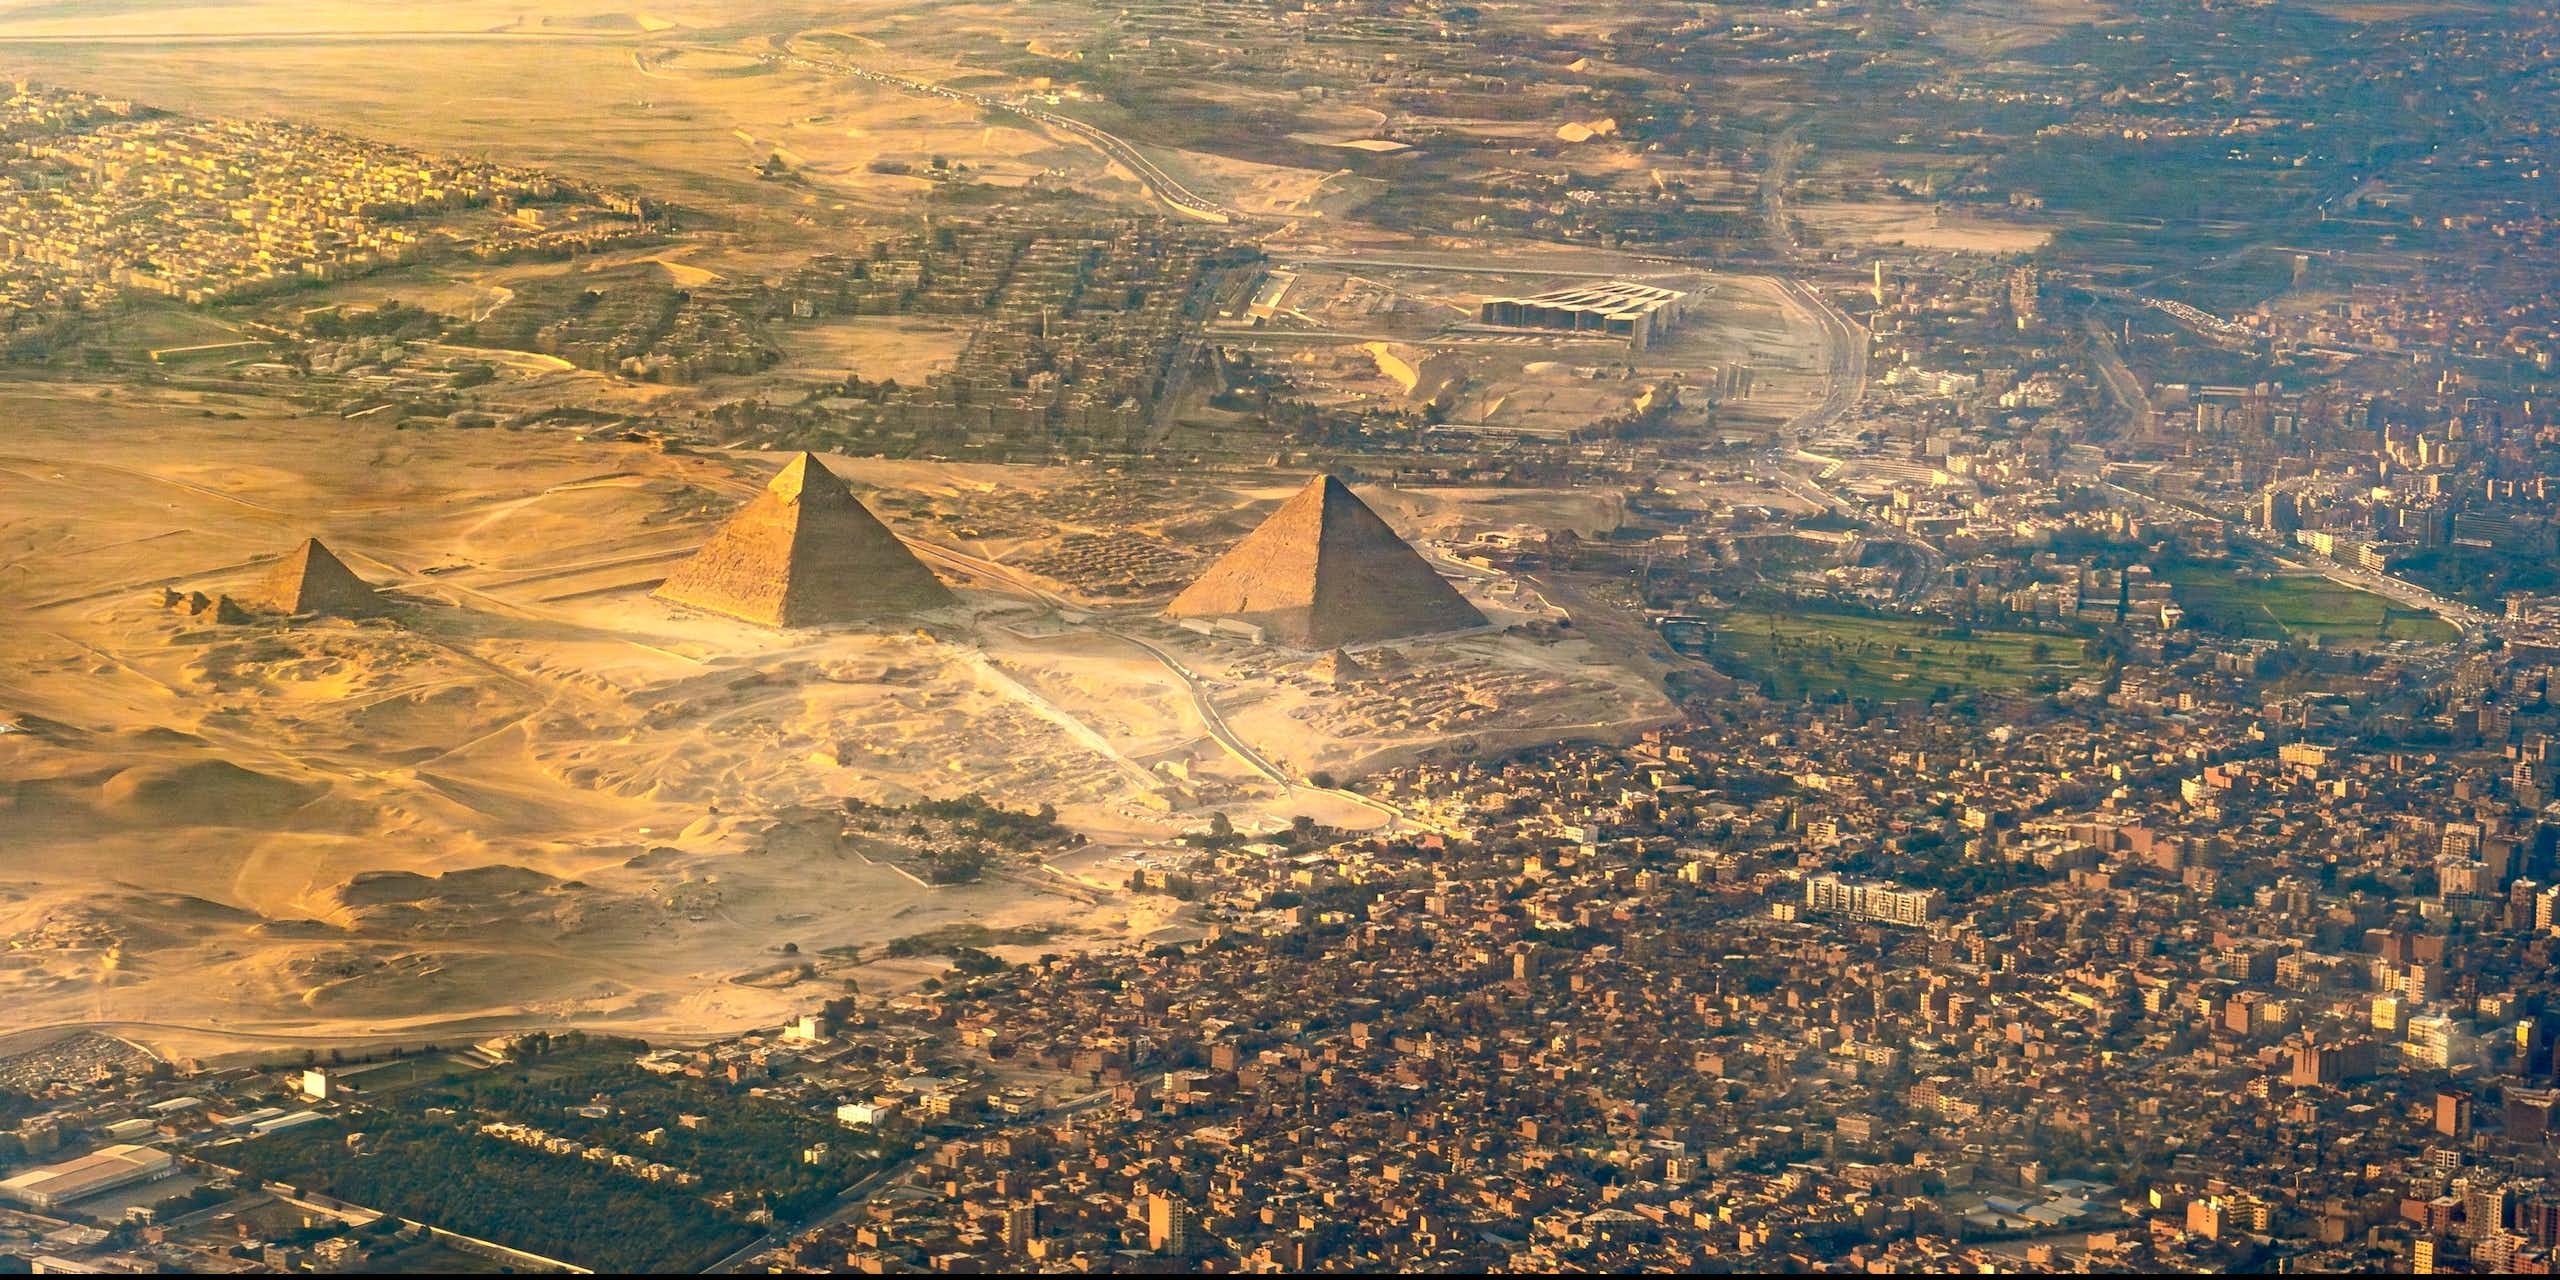 Aerial photo of pyramids with city nearby